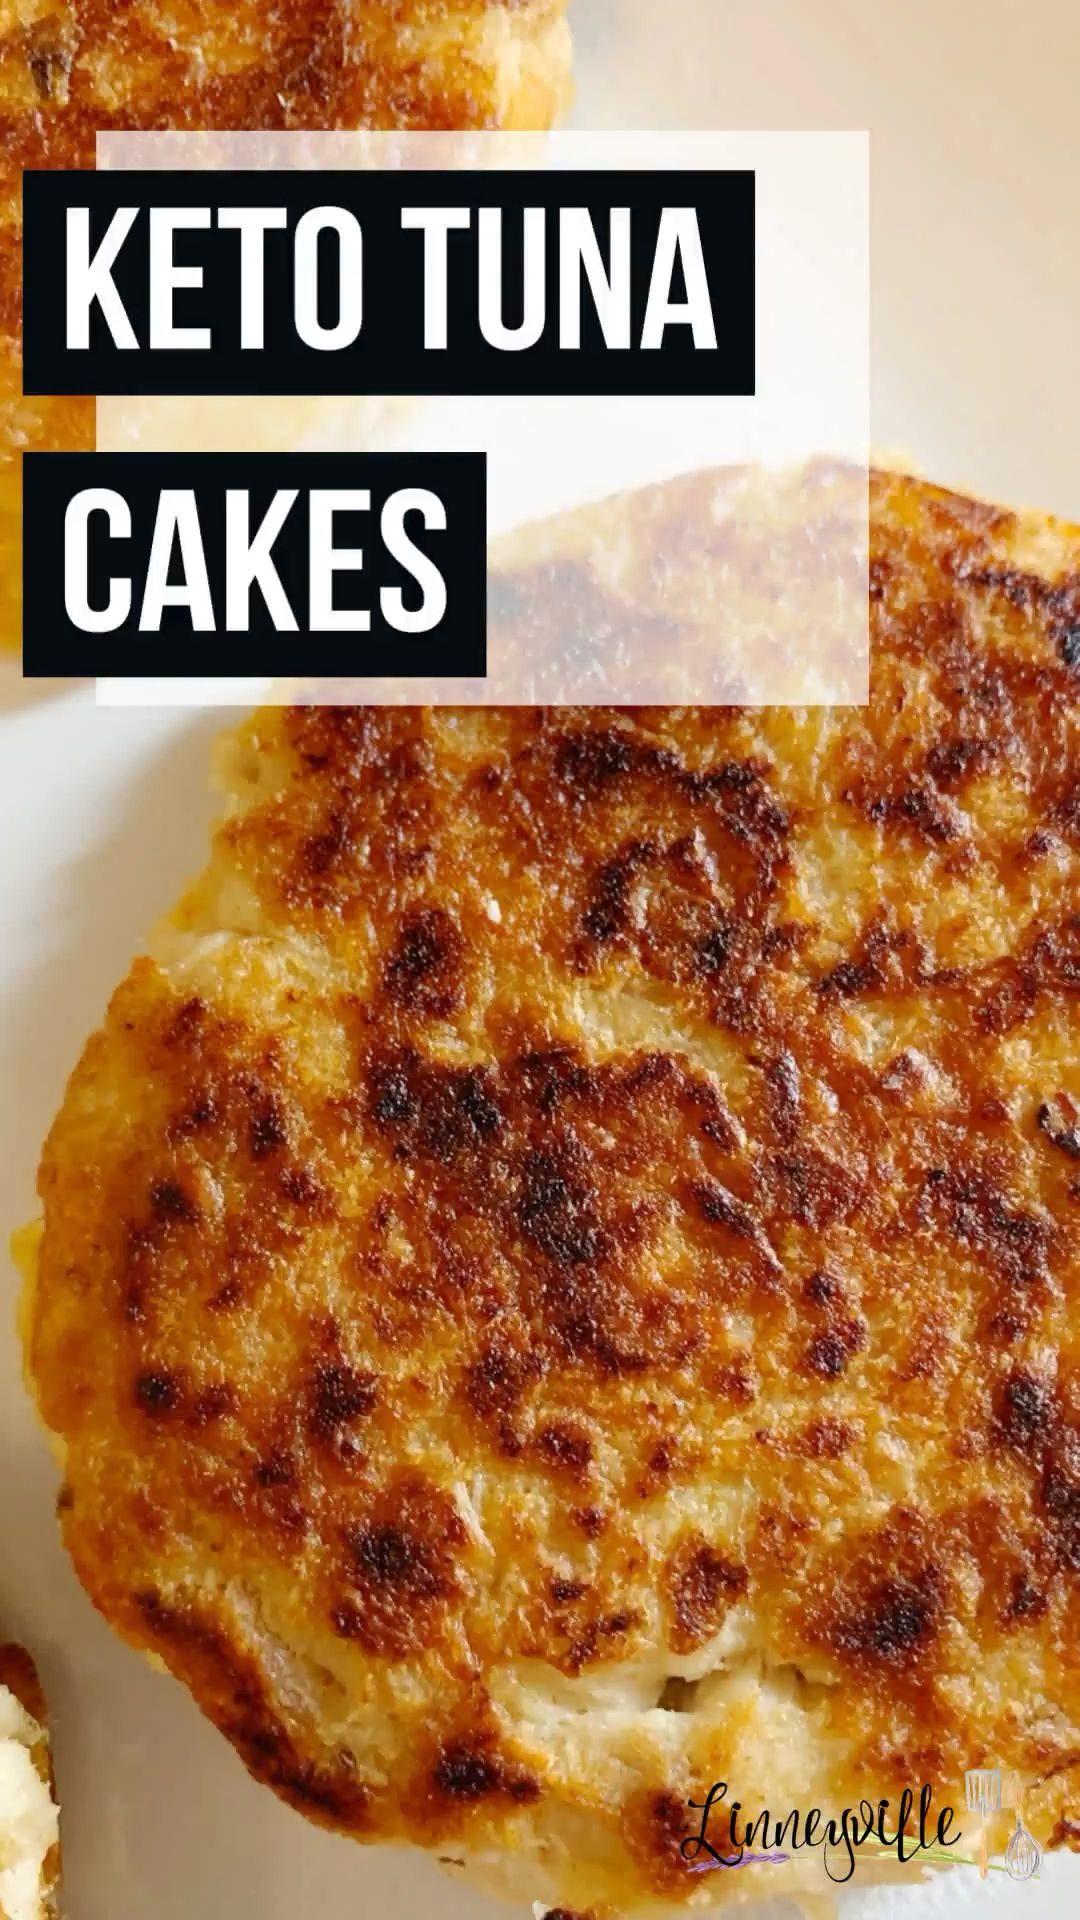 Low Carb Old Bay Tuna Cakes - Linneyville -   15 healthy recipes Low Carb eating plans ideas